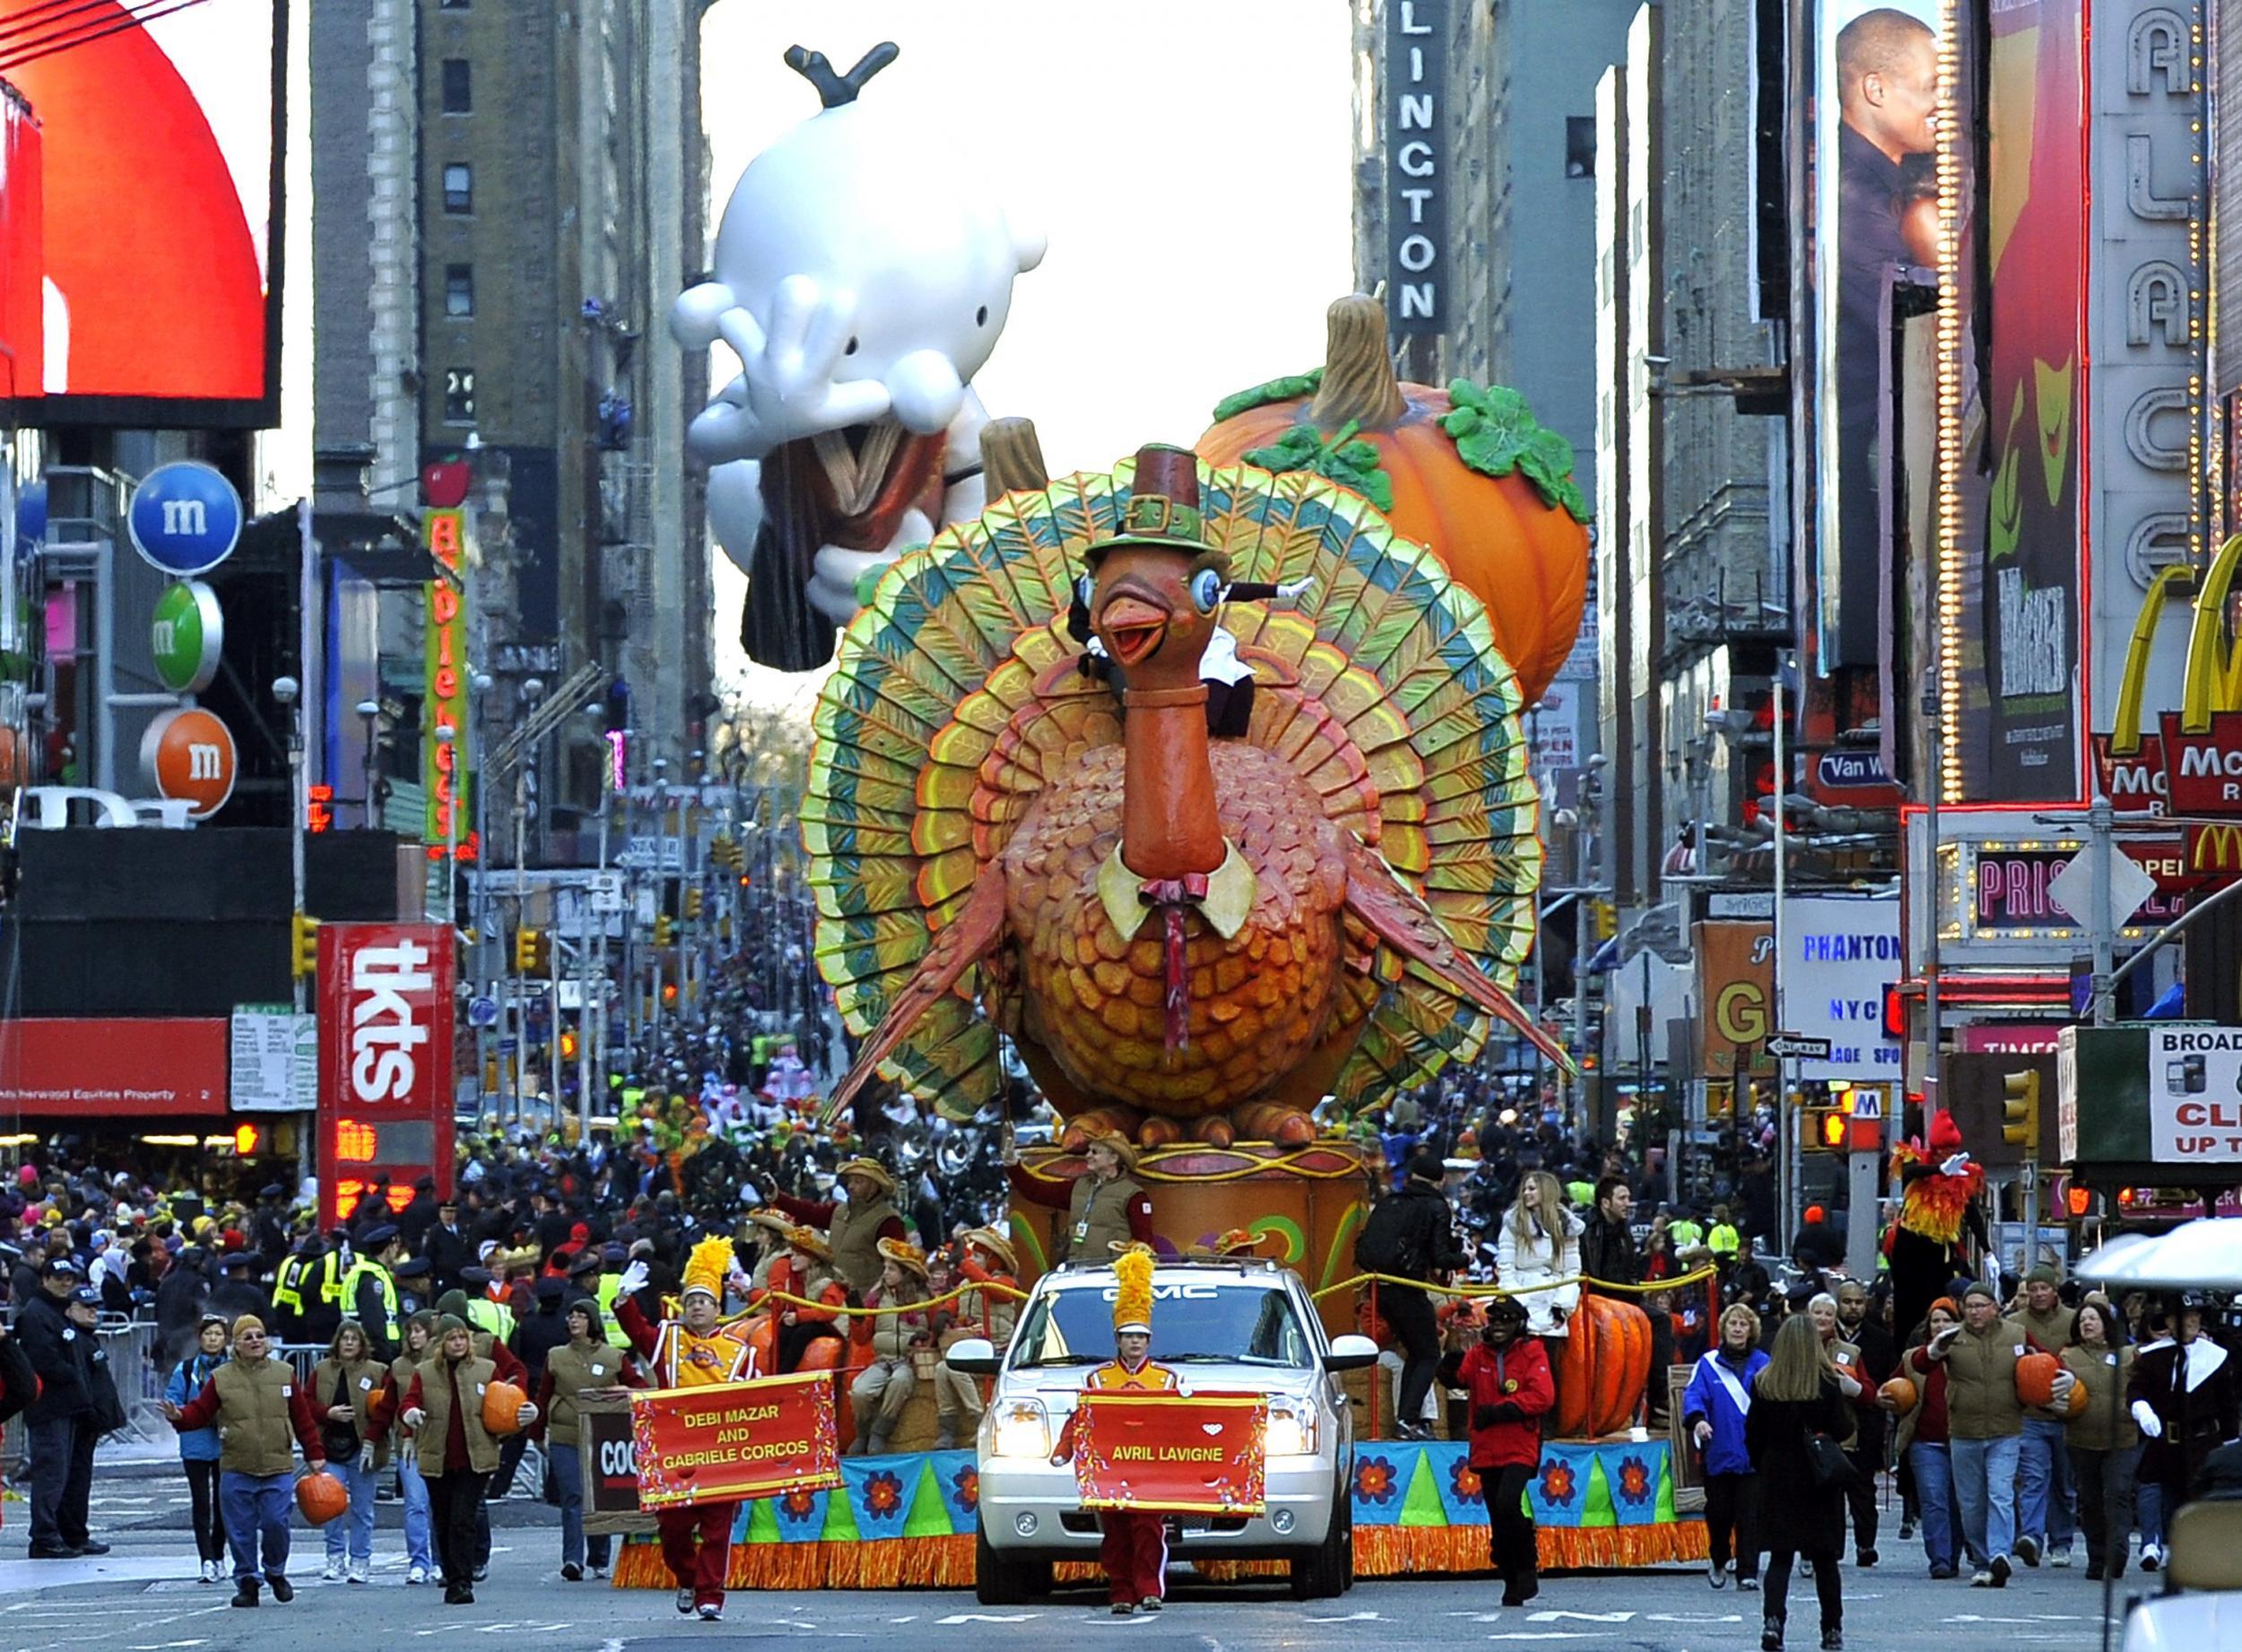 The Macy's Thanksgiving Day Parade takes place in New York City